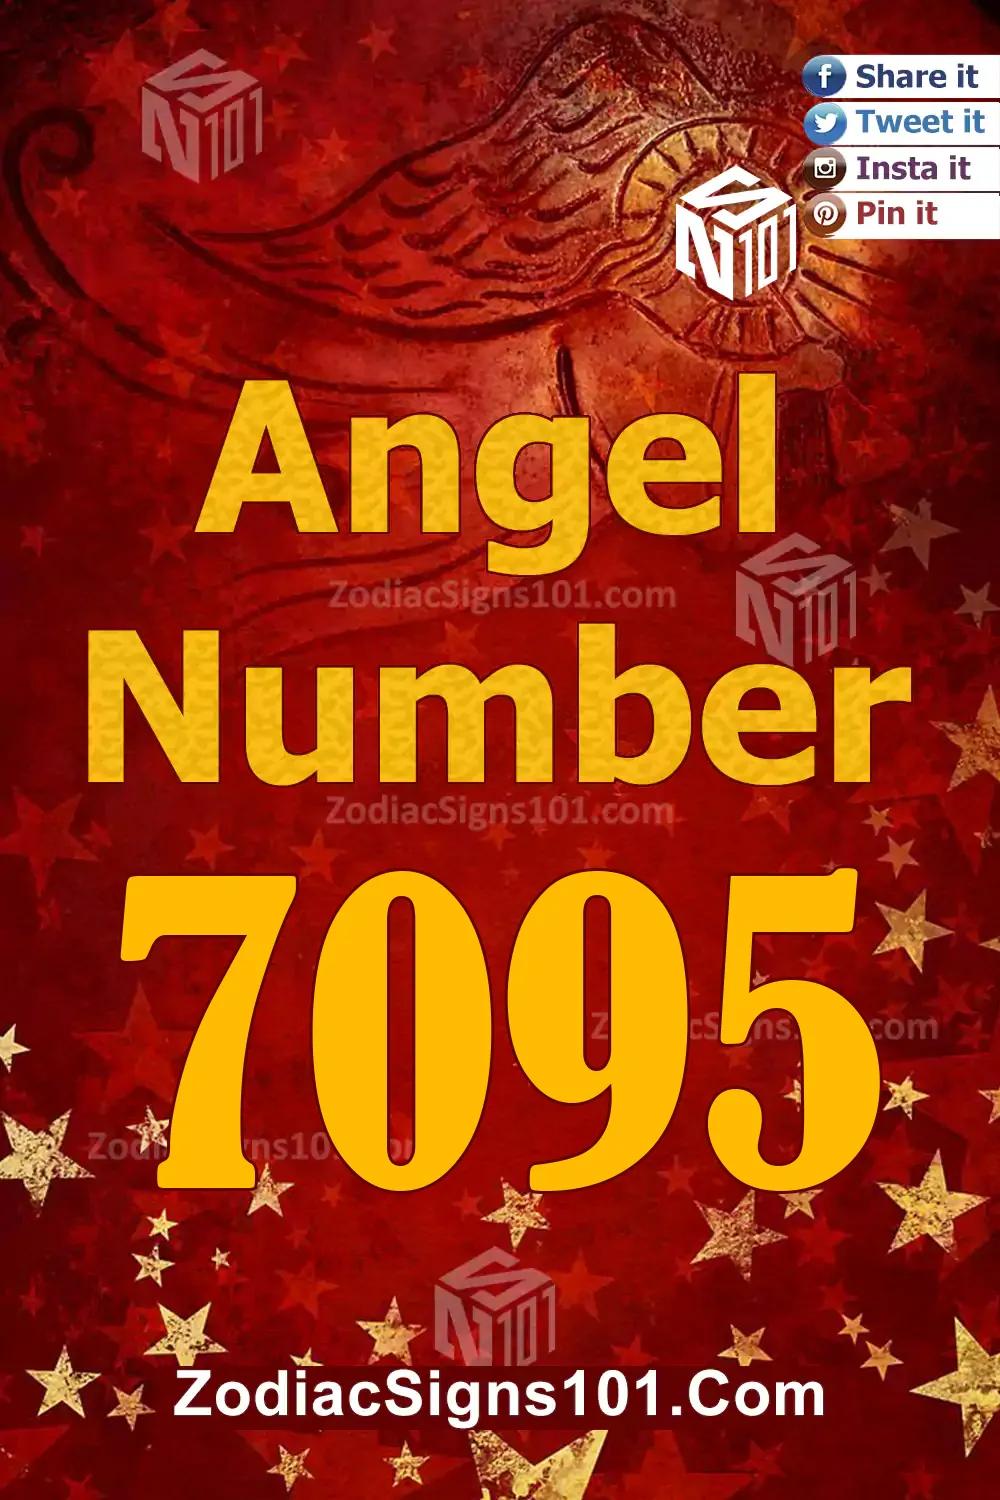 7095 Angel Number Meaning